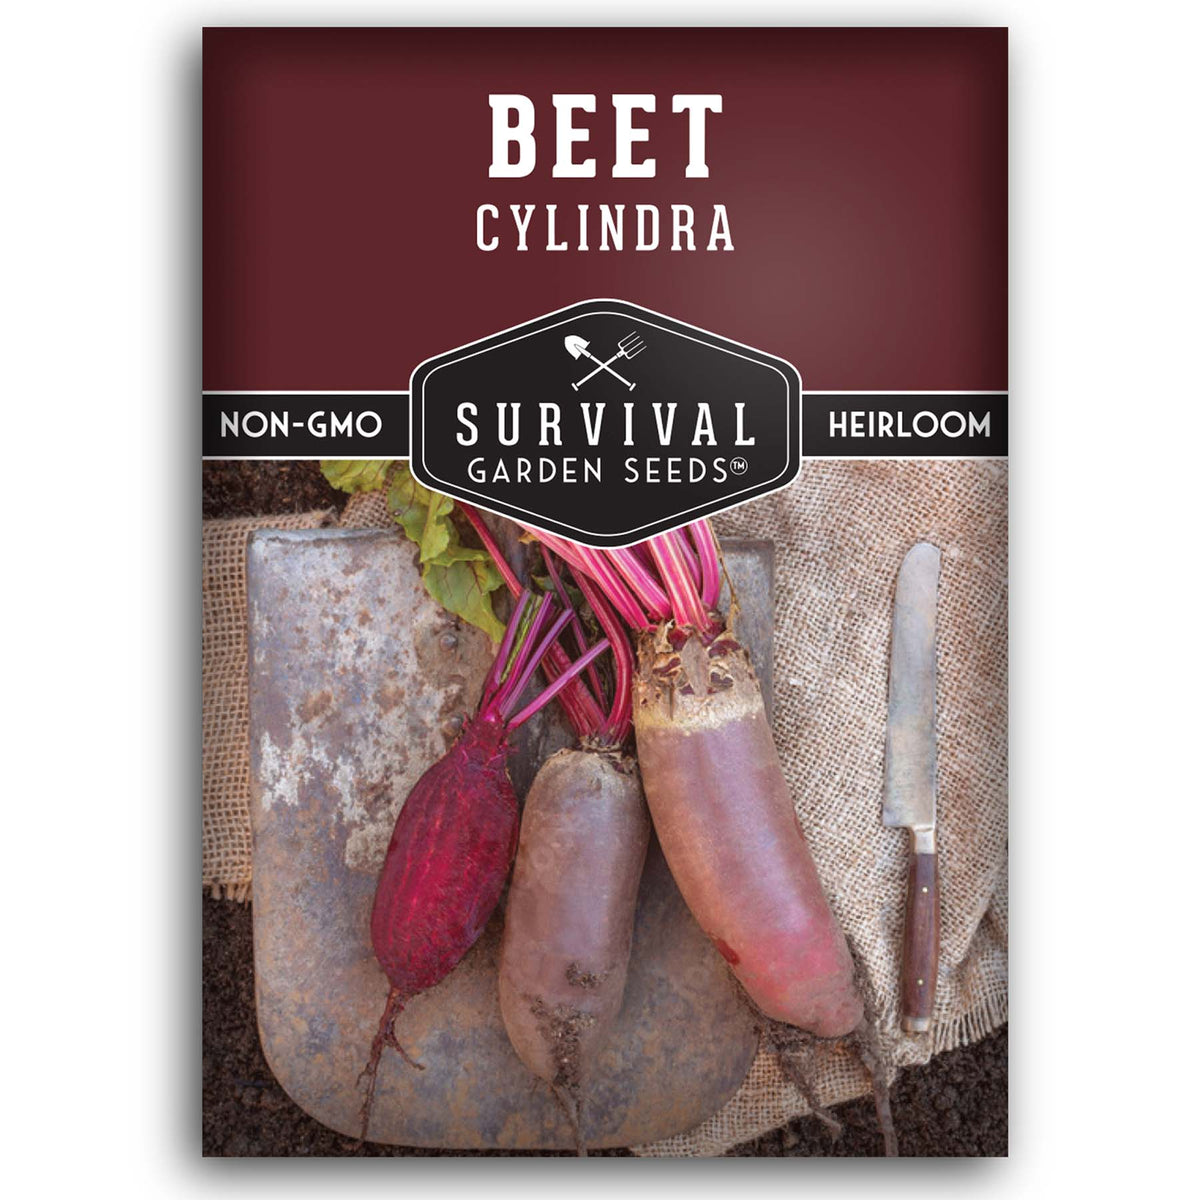 Cylindra Beet seeds for planting